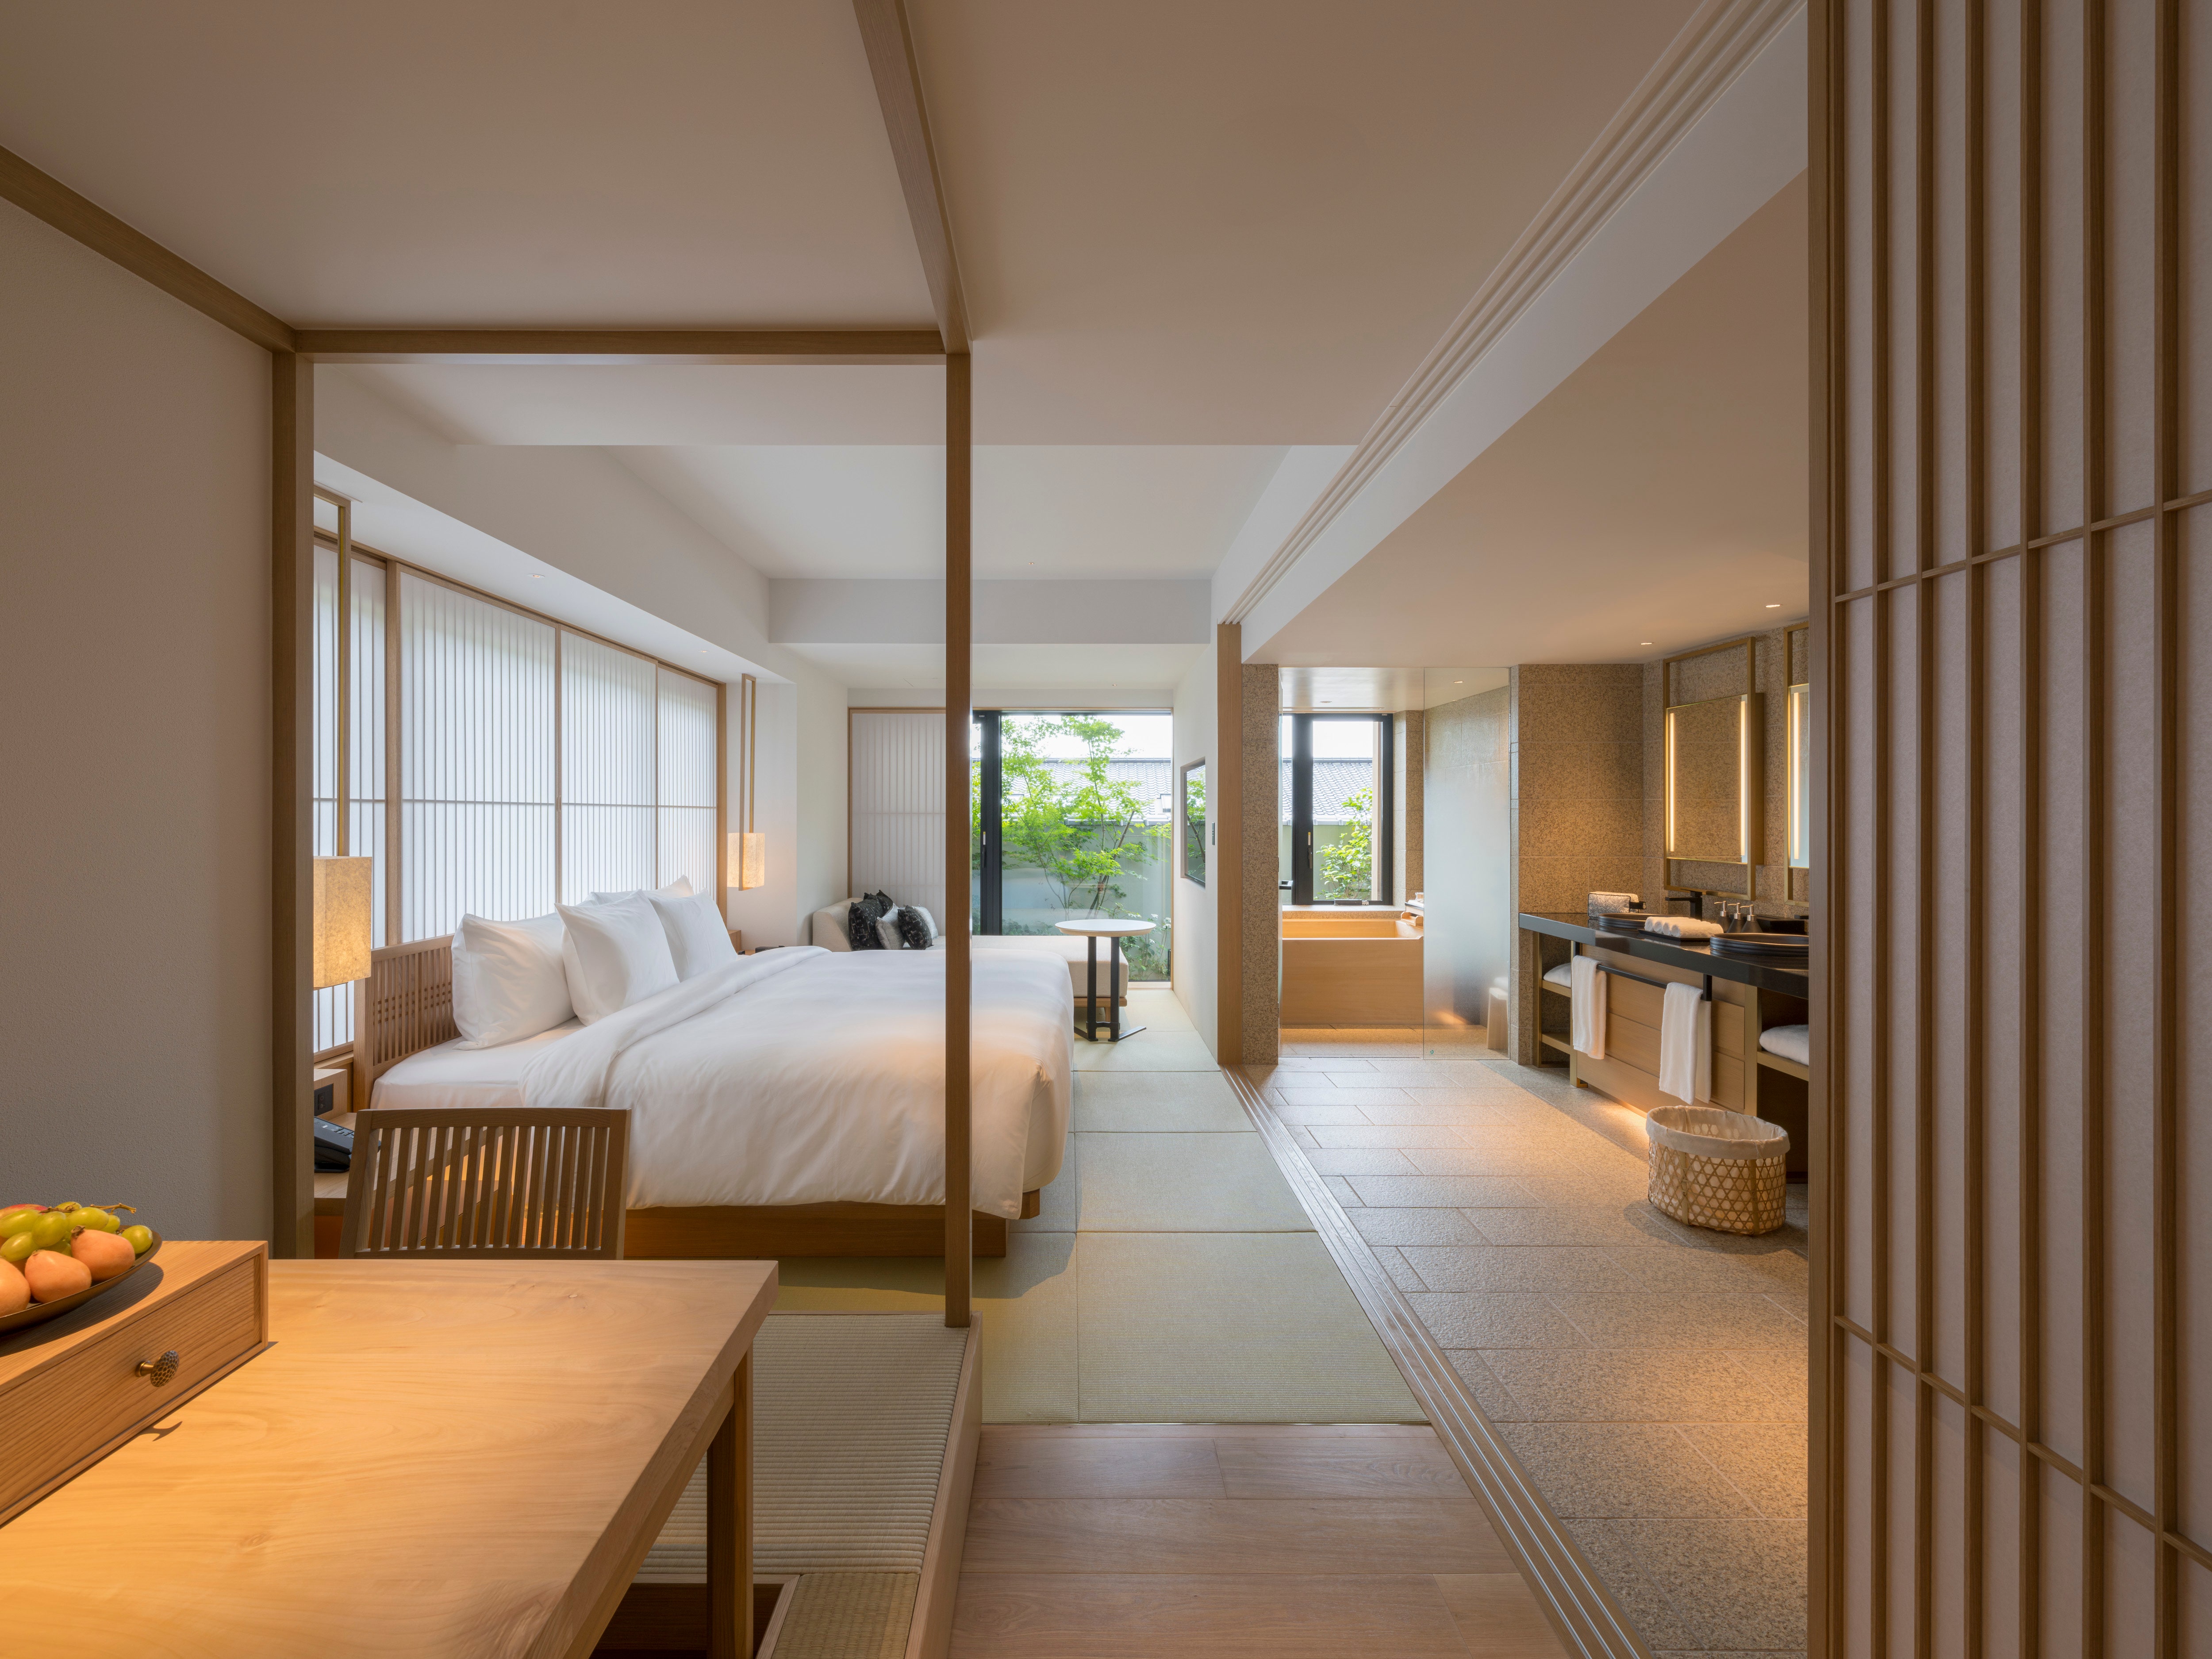 A First Look Inside Banyan Tree Higashiyama, the Only Hotel in Kyoto With a Noh Stage